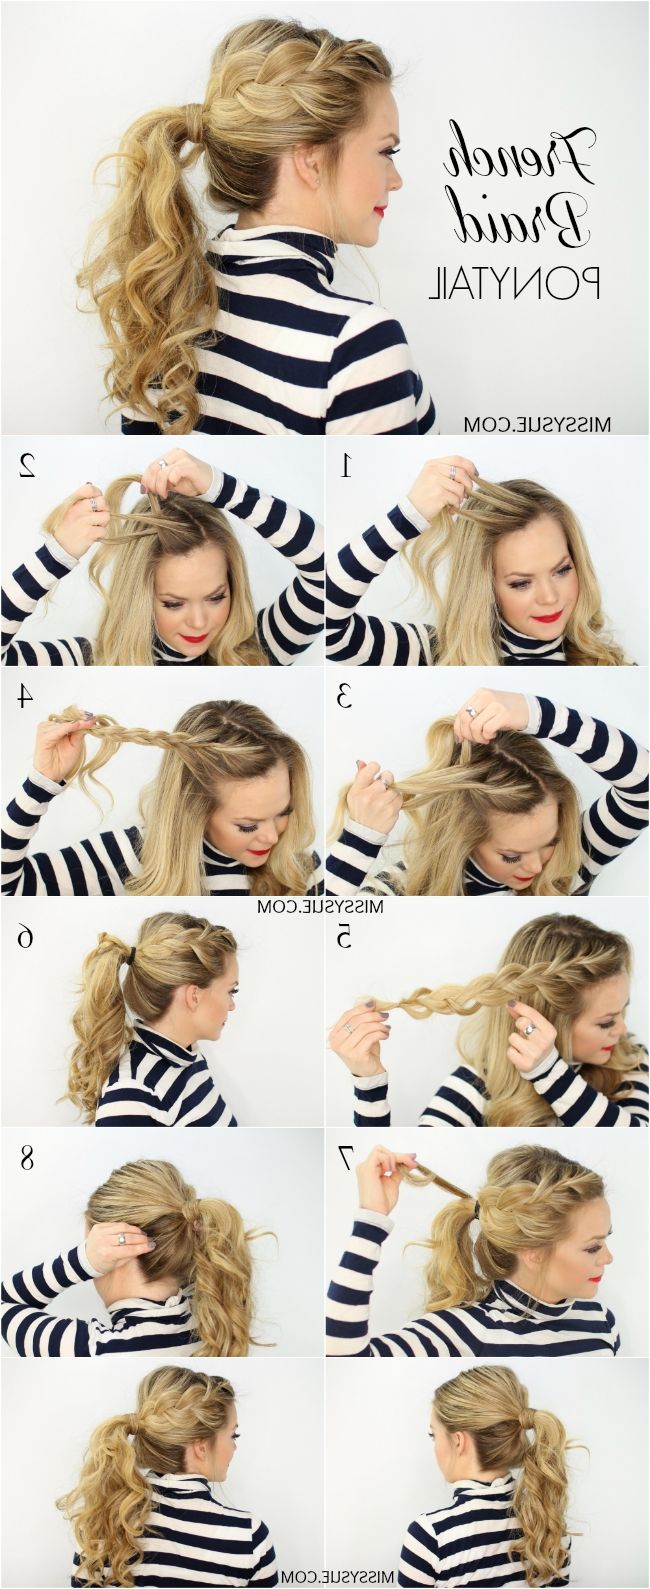 Widely Used Braided Headband And Twisted Side Pony Hairstyles With Side French Braid Ponytail (View 13 of 20)